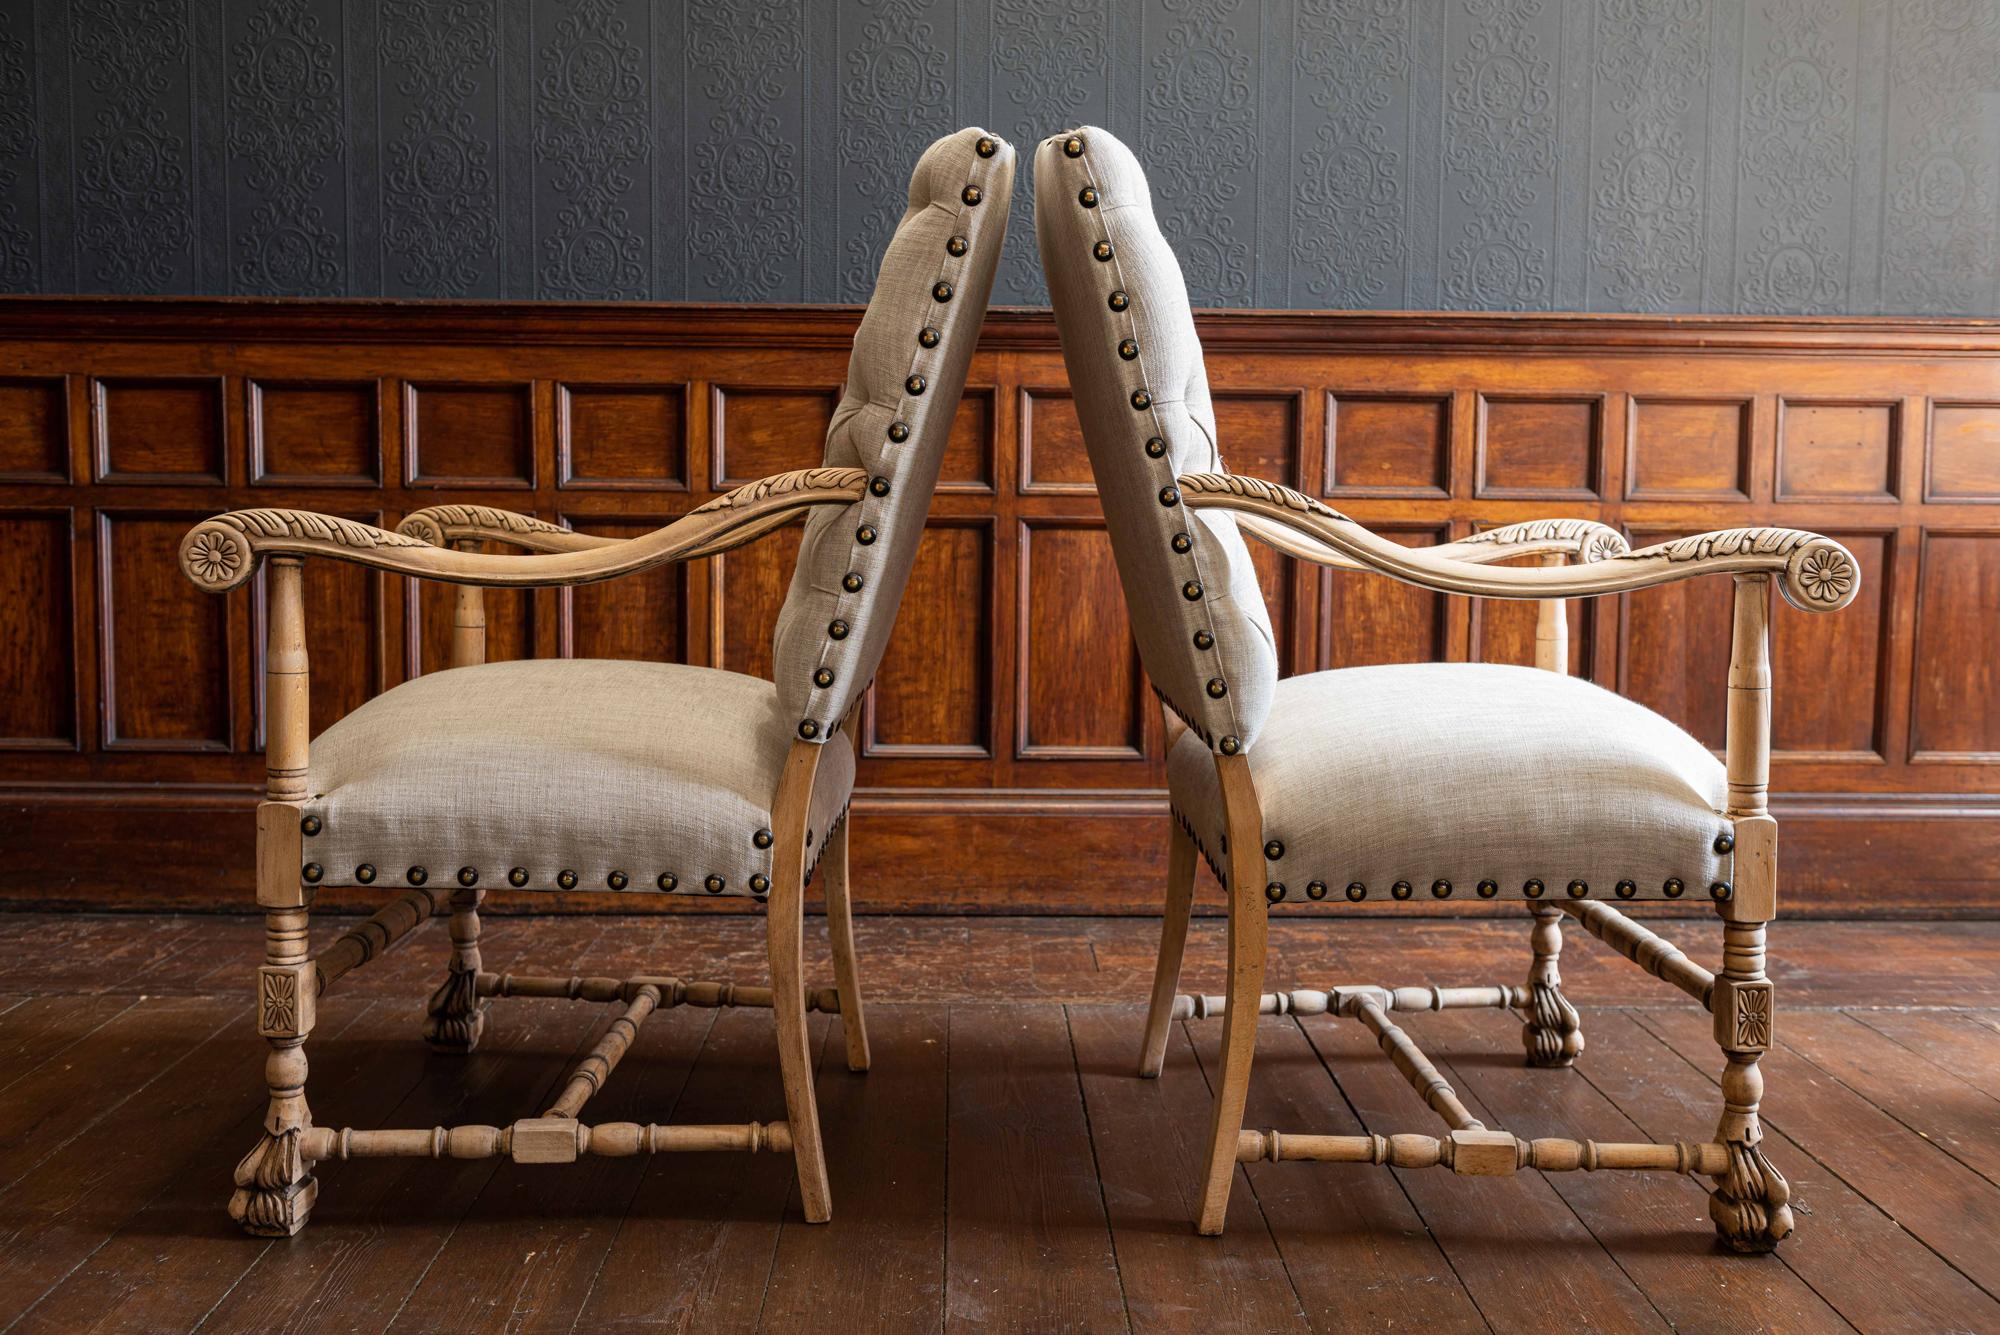 Pair of 19th century French library armchairs reupholstered in linen,
circa 1890.

Bleached beech carved frames sat upon large lion paw feet. Upholstered in neutral linen and finished with large brass studs.

Price is for the pair.

Measures: 120 H